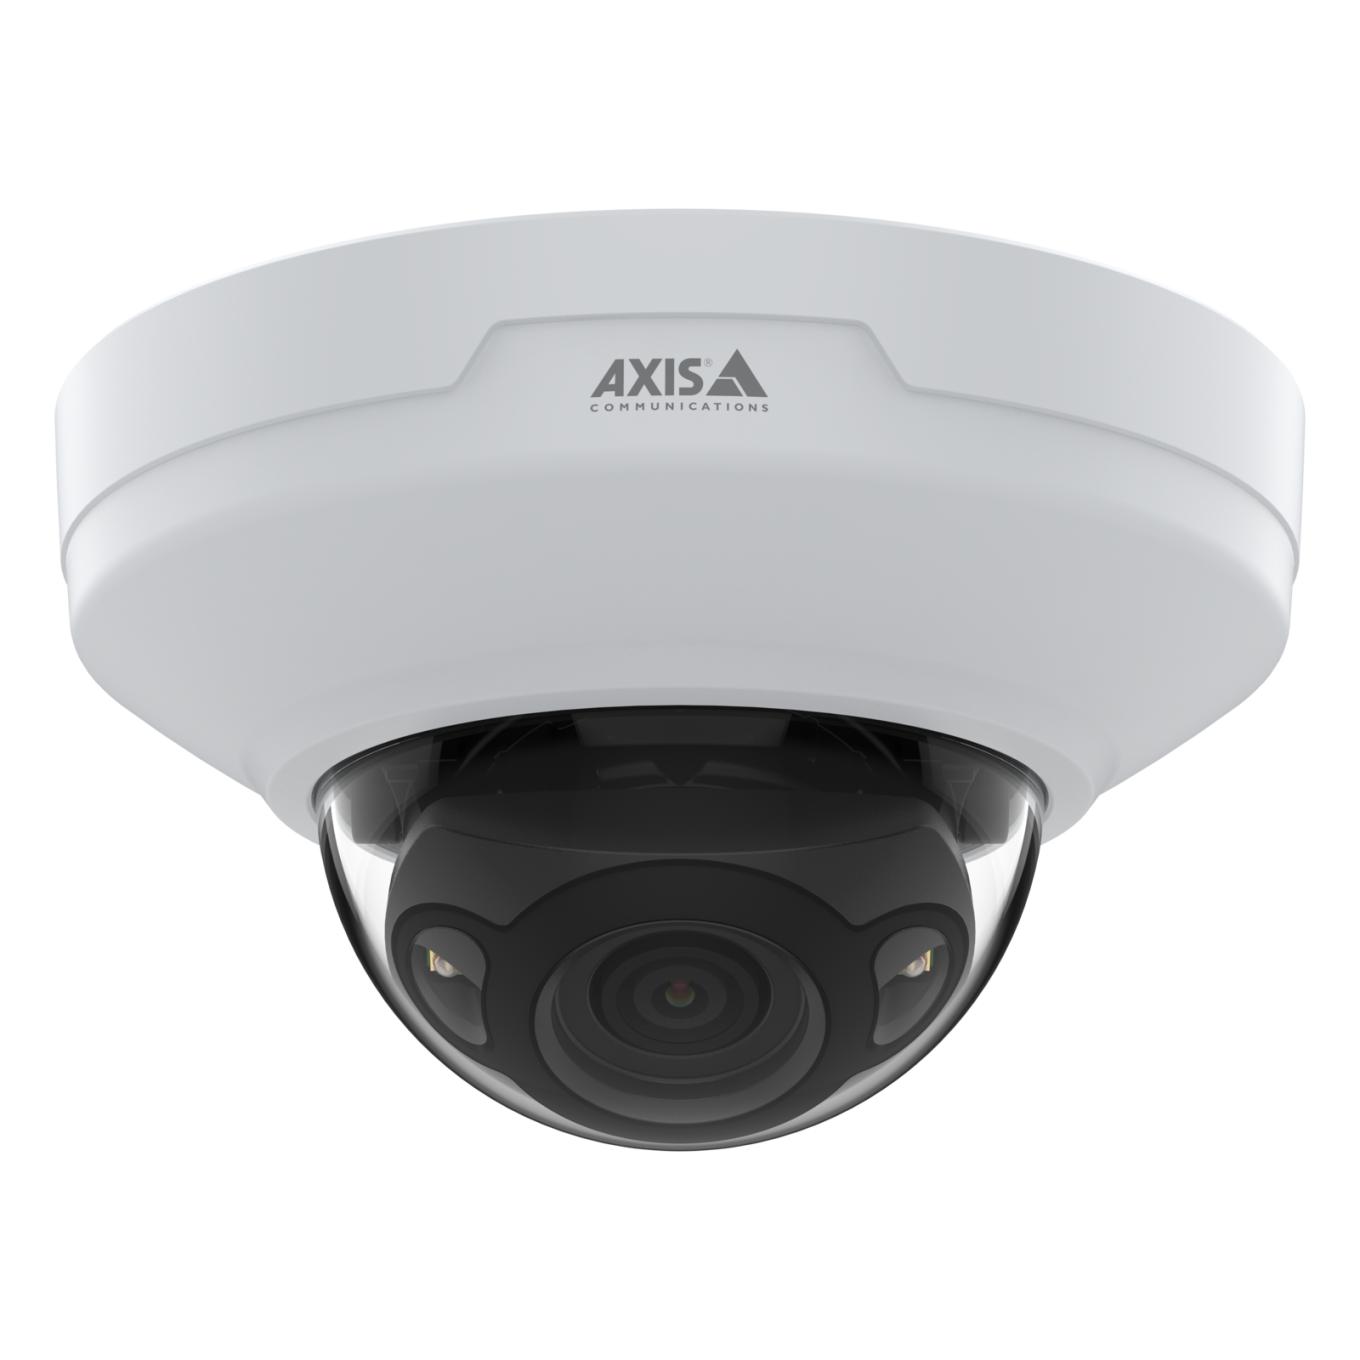 AXIS M4215-LV Dome Camera | Axis Communications